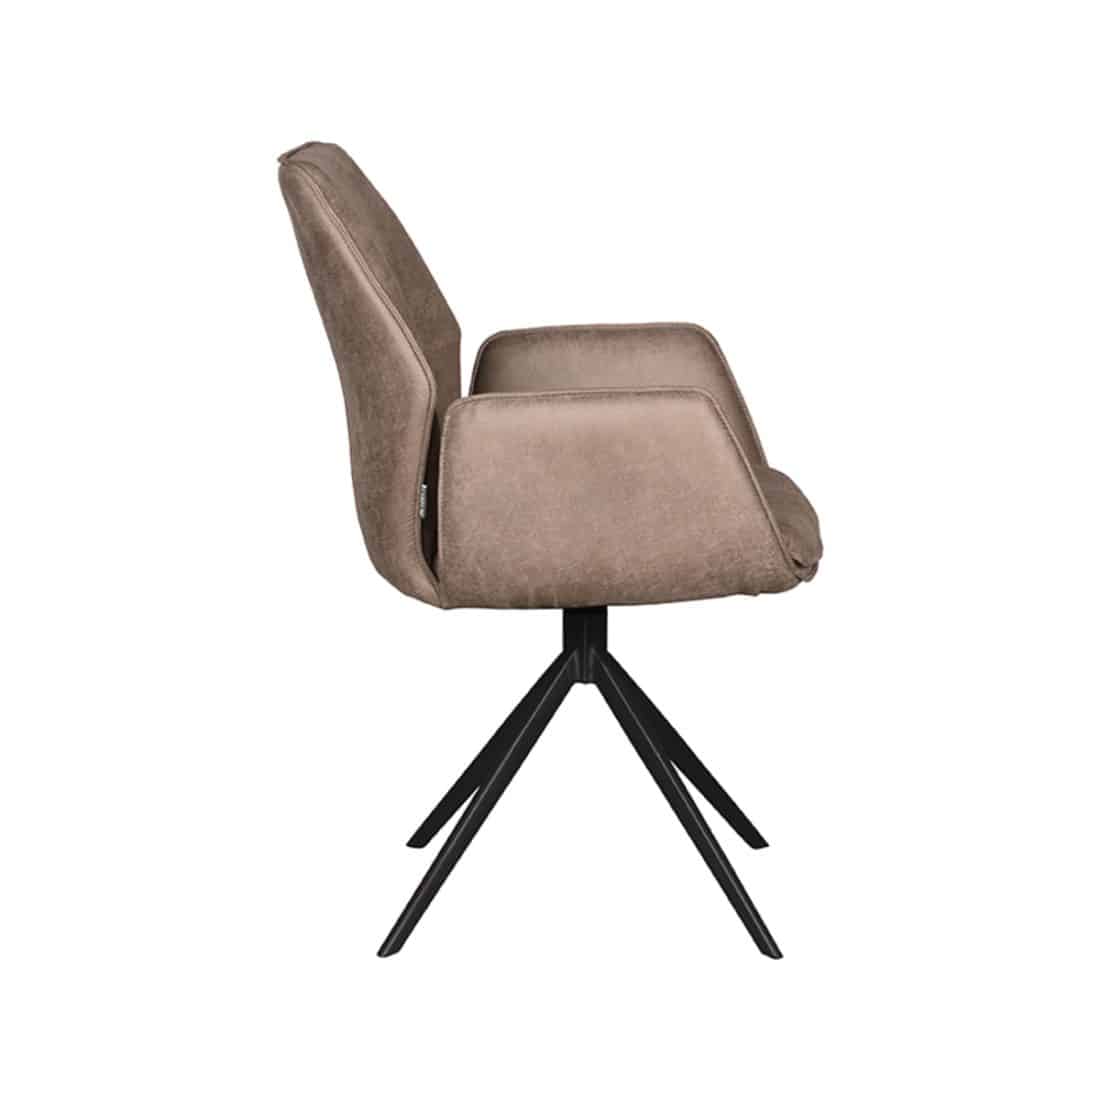 Trp Post Container Data Trp Post Id 18773 Dining Chair Mellow 8211 58x63x92 Cm 8211 Rhb Home Amp Living Trp Post Container